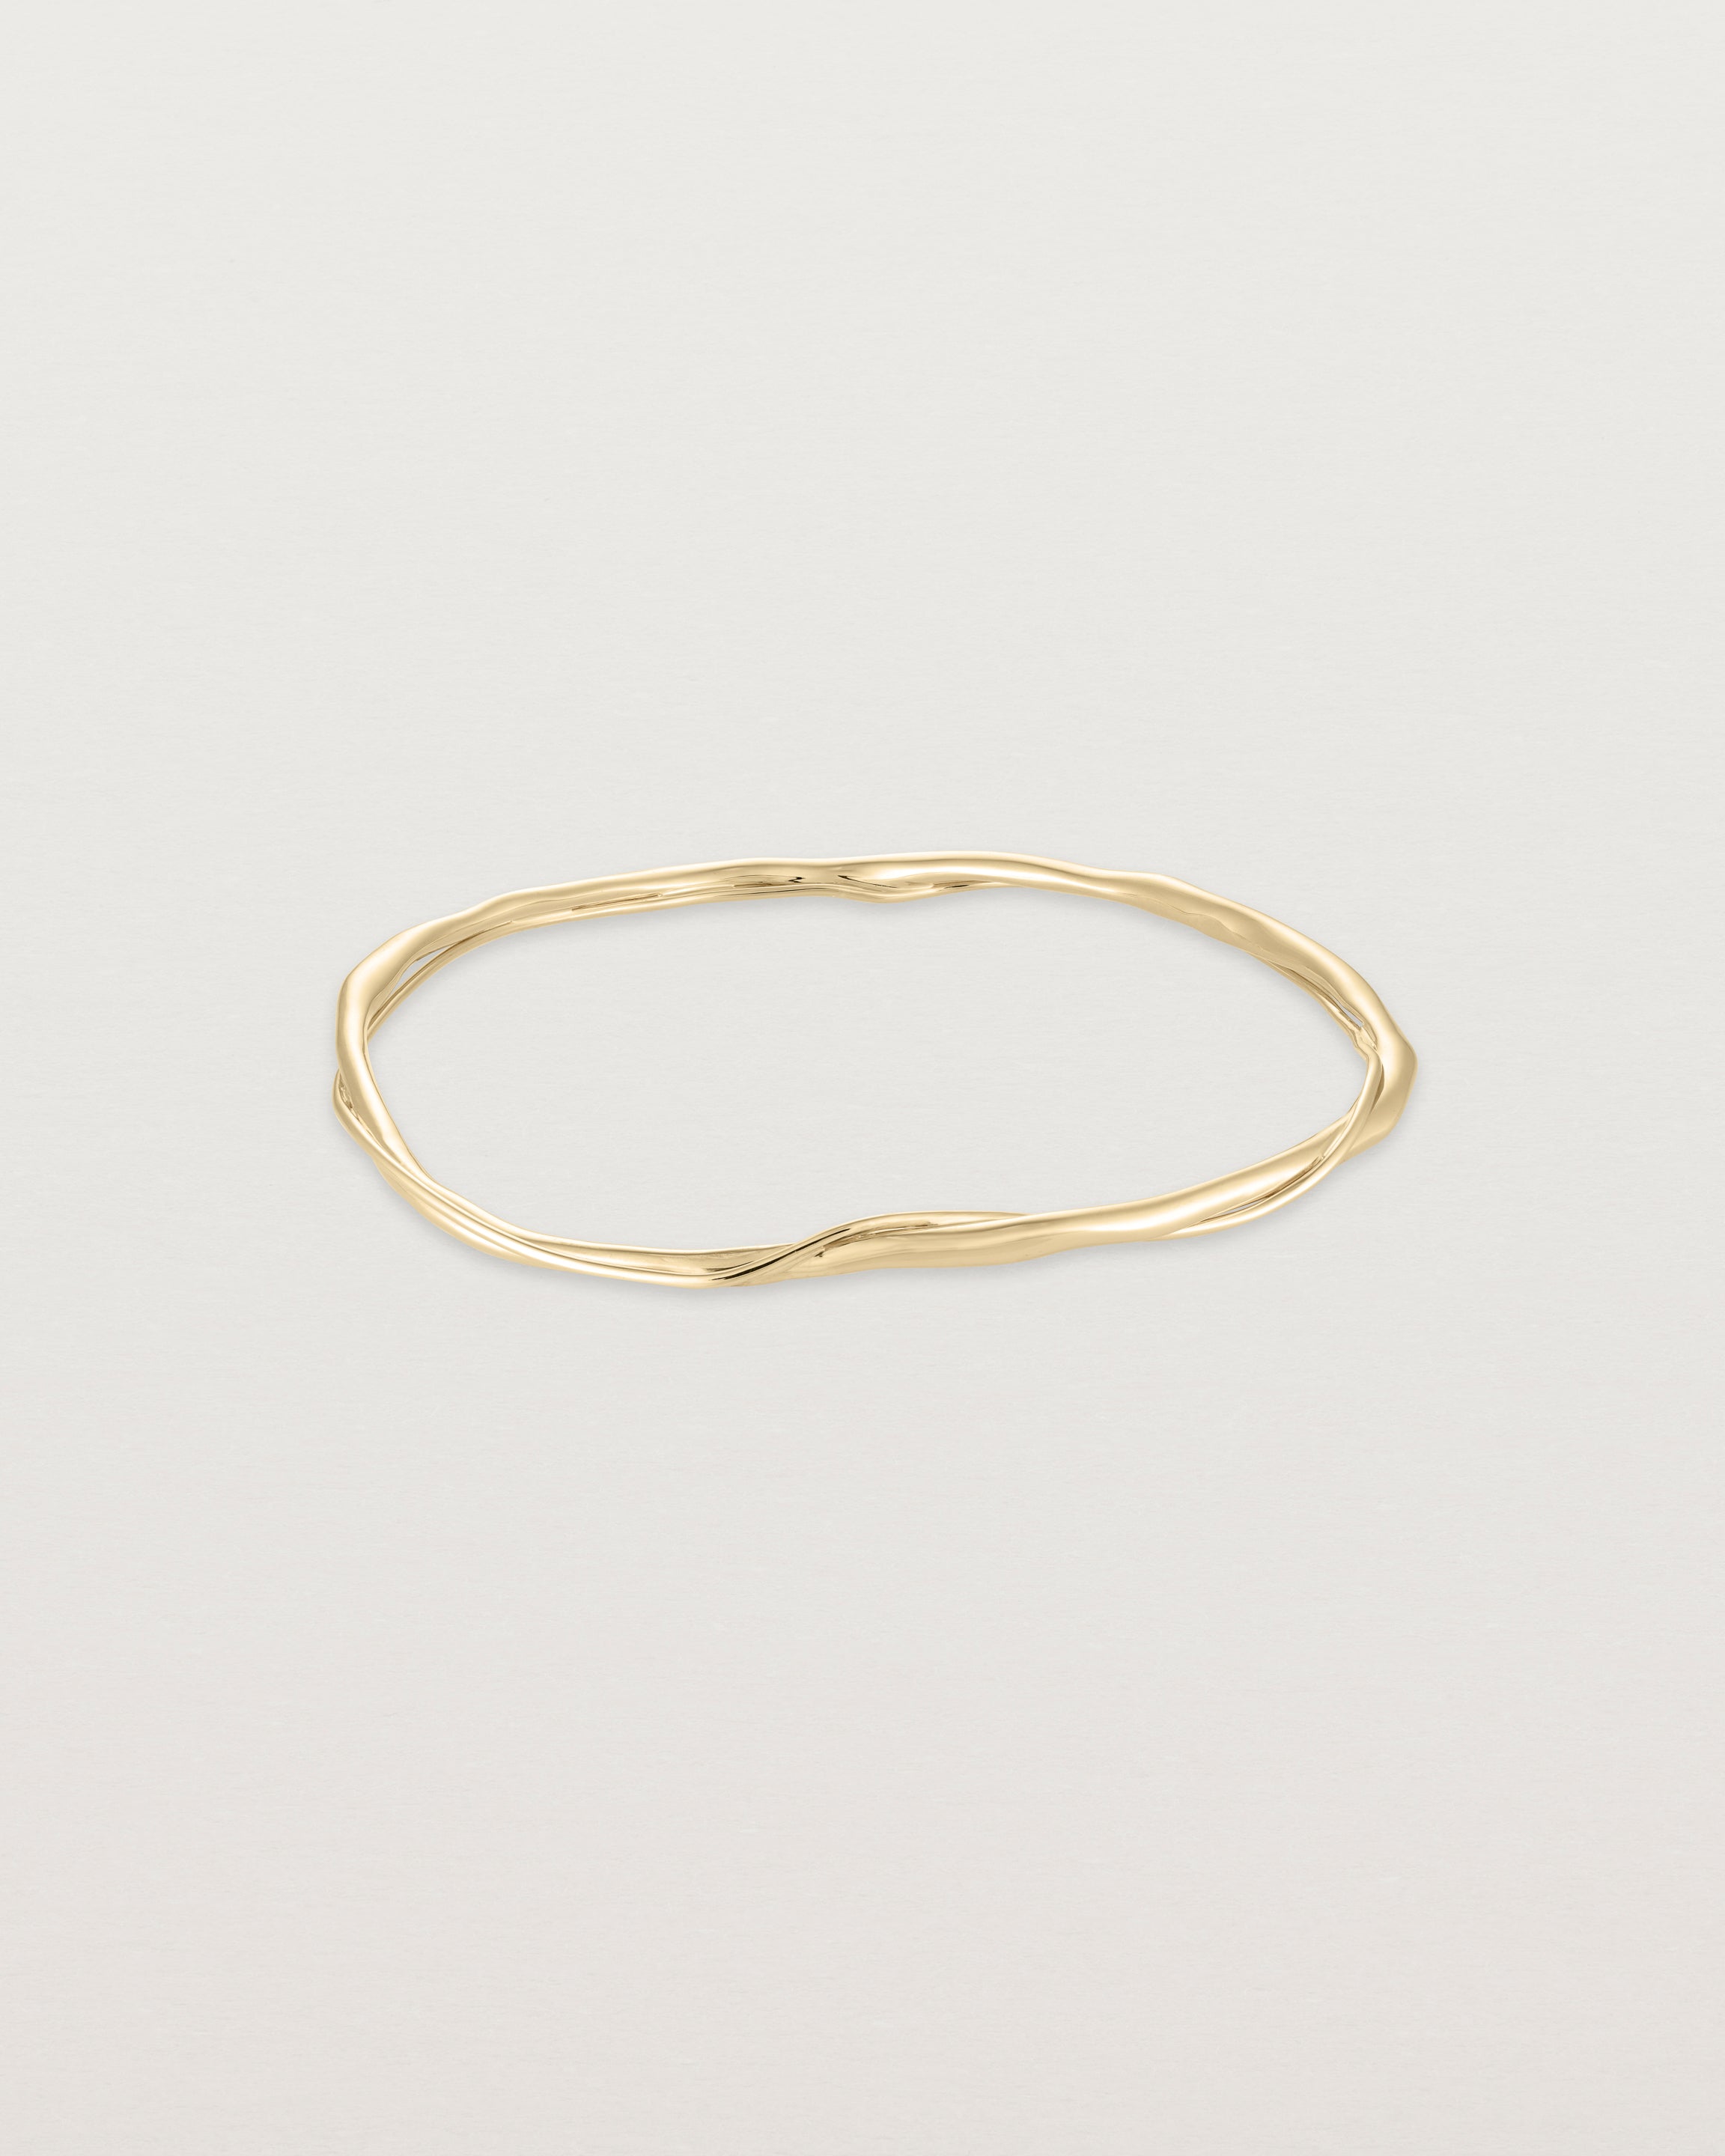 Front view of the Dalí Bangle in yellow gold